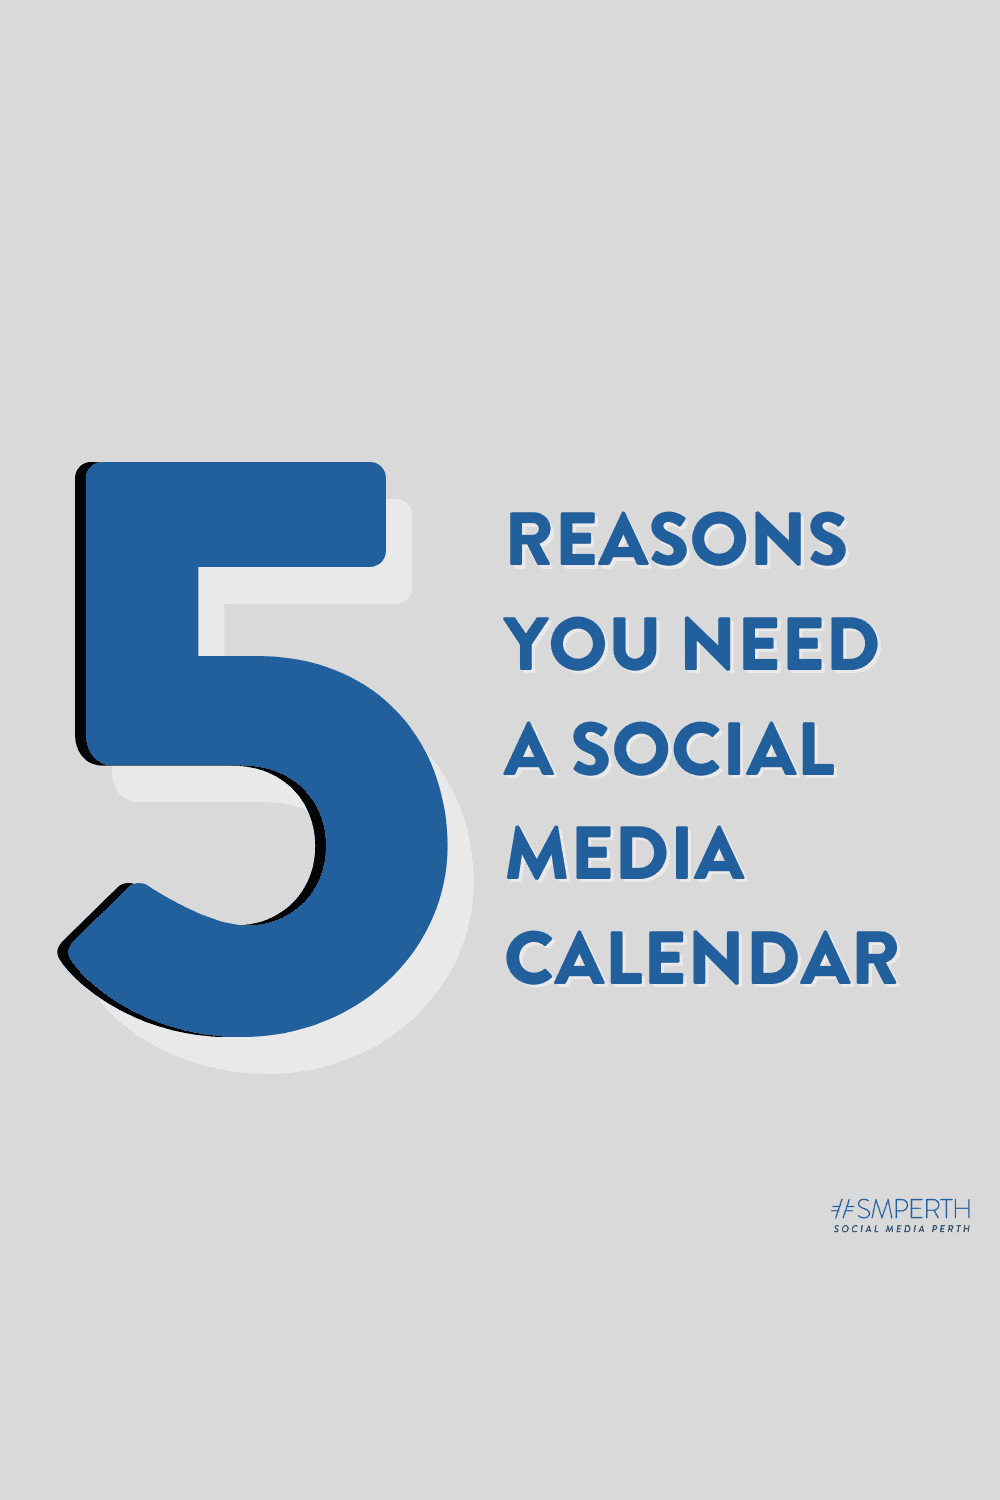 5 Reasons Why You Need a Social Media Content Calendar